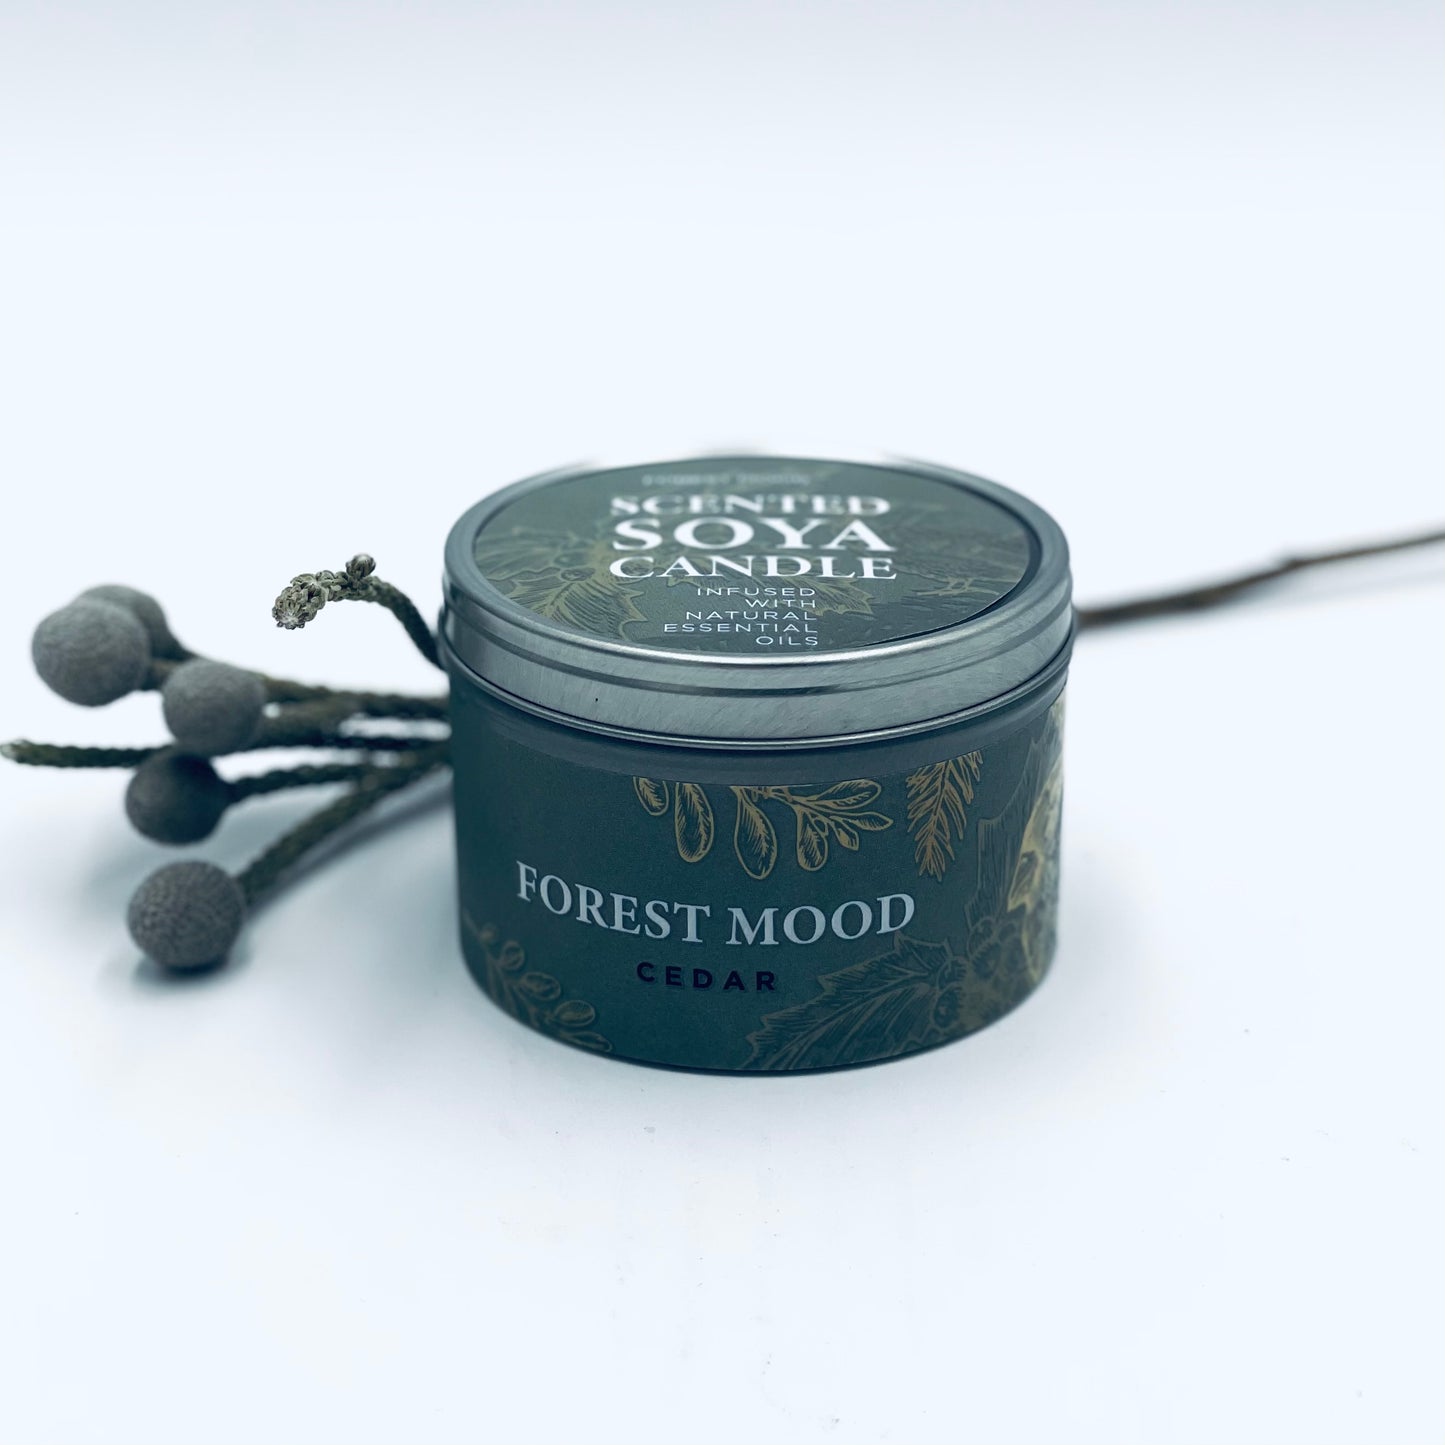 Natural soy wax candle "FOREST MOOD" with CEDAR WOOD scent